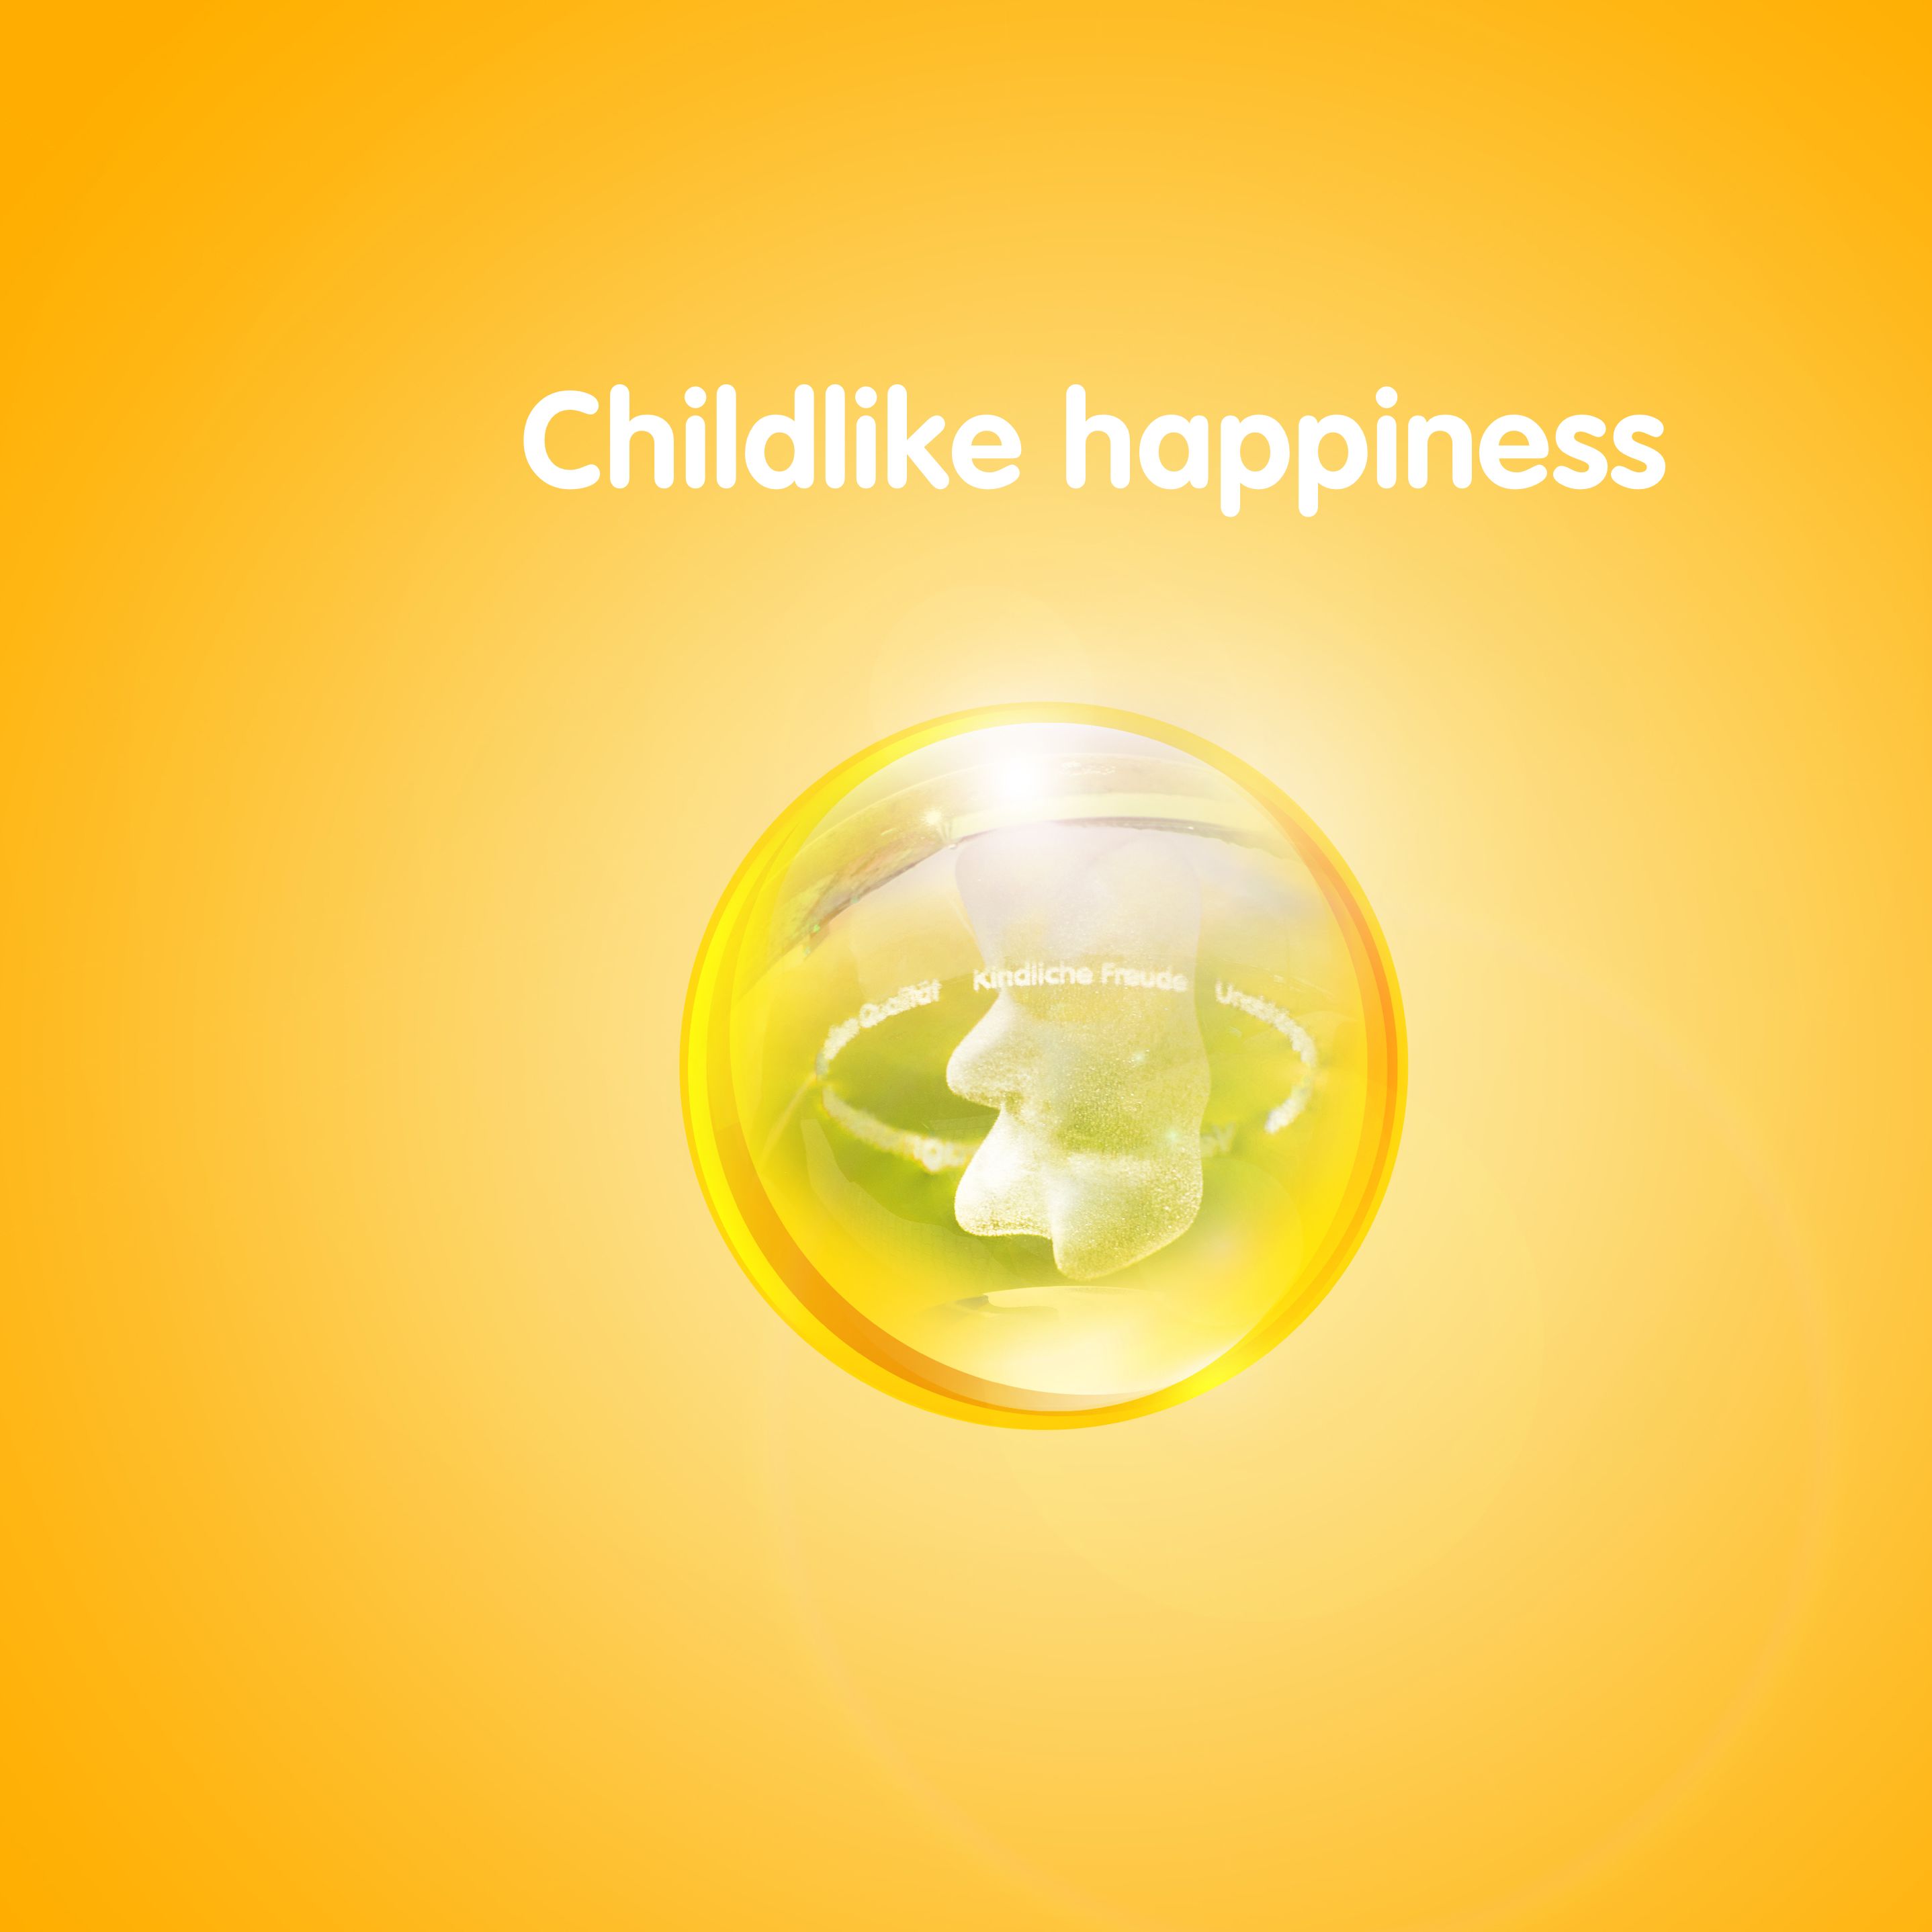 Graphic with Goldbear in transparent ball against yellow background with text: ‘Childlike happiness’